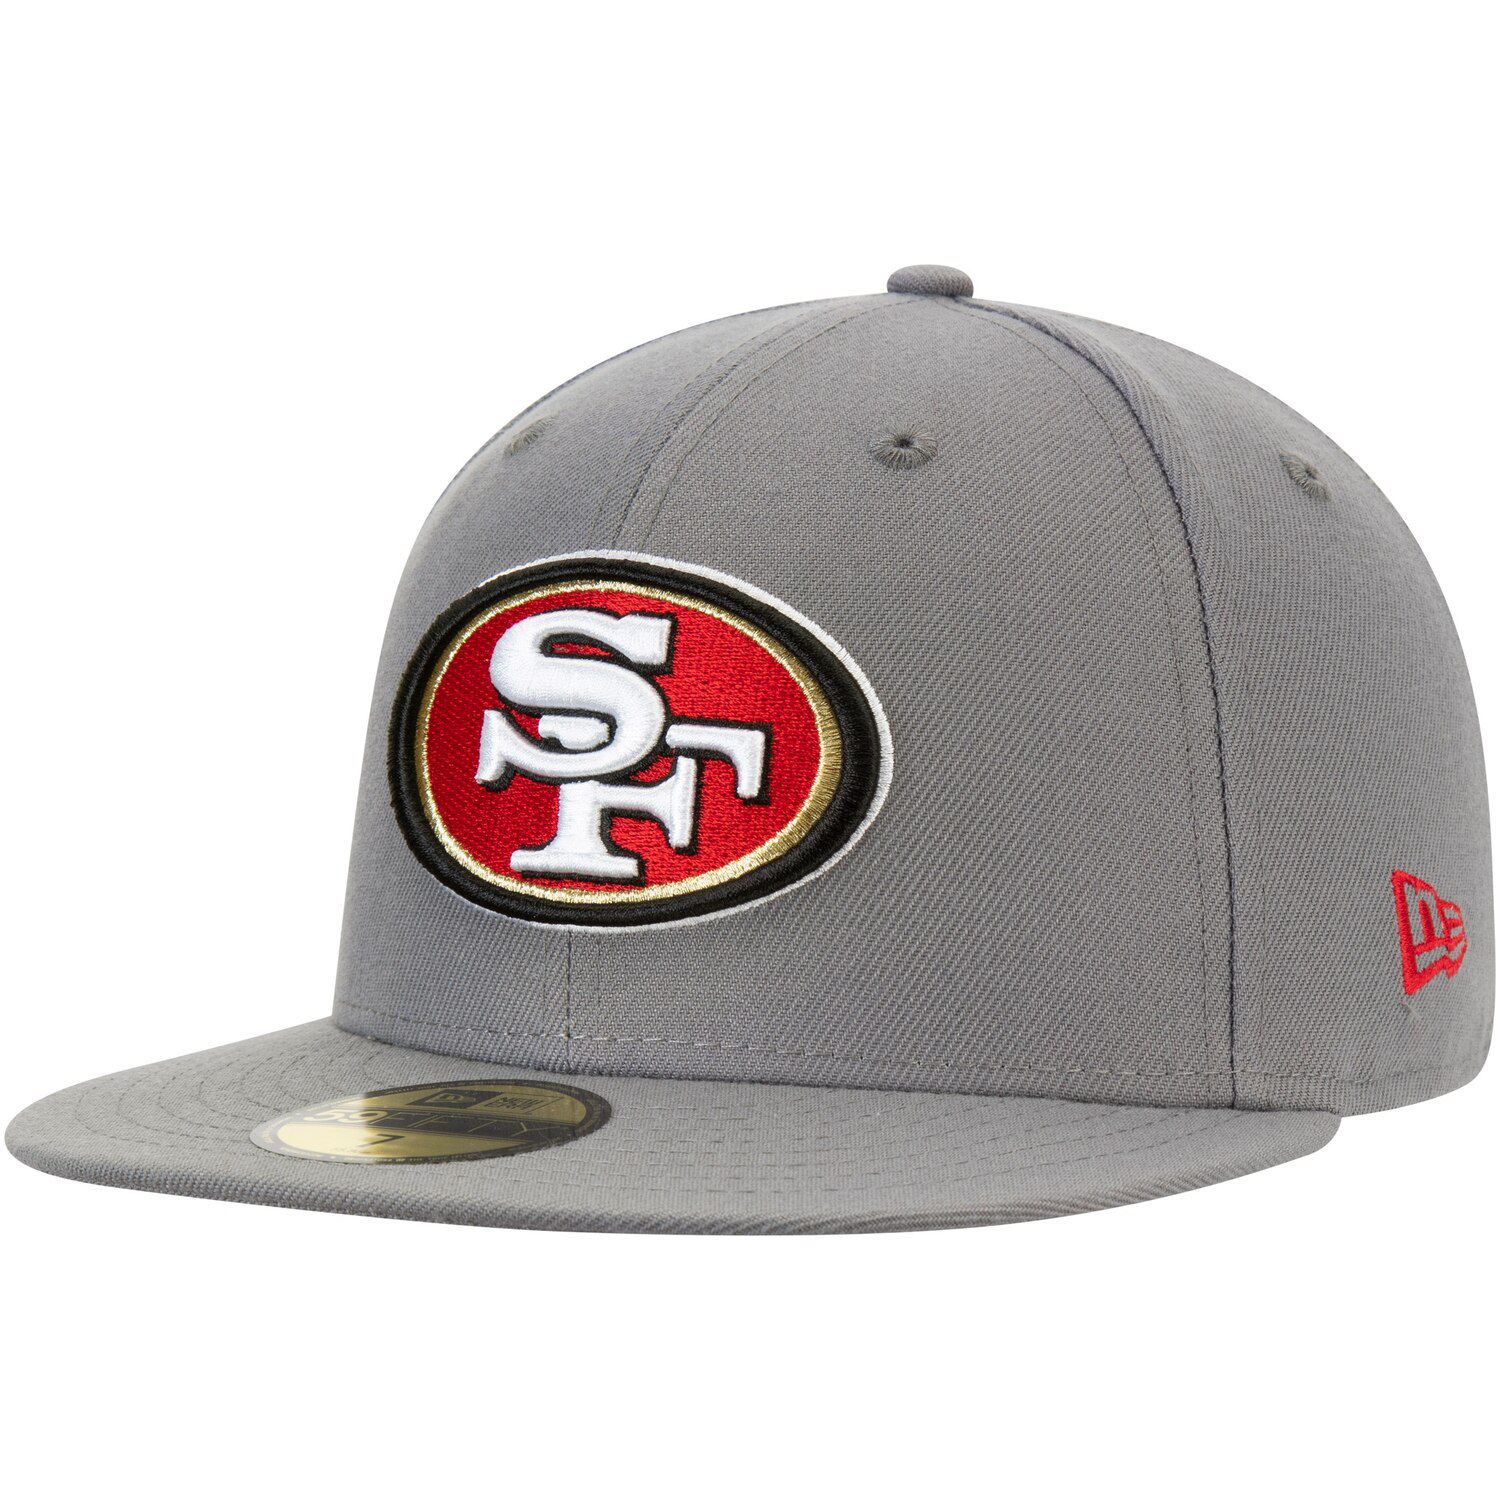 Storm 59FIFTY Fitted Hat